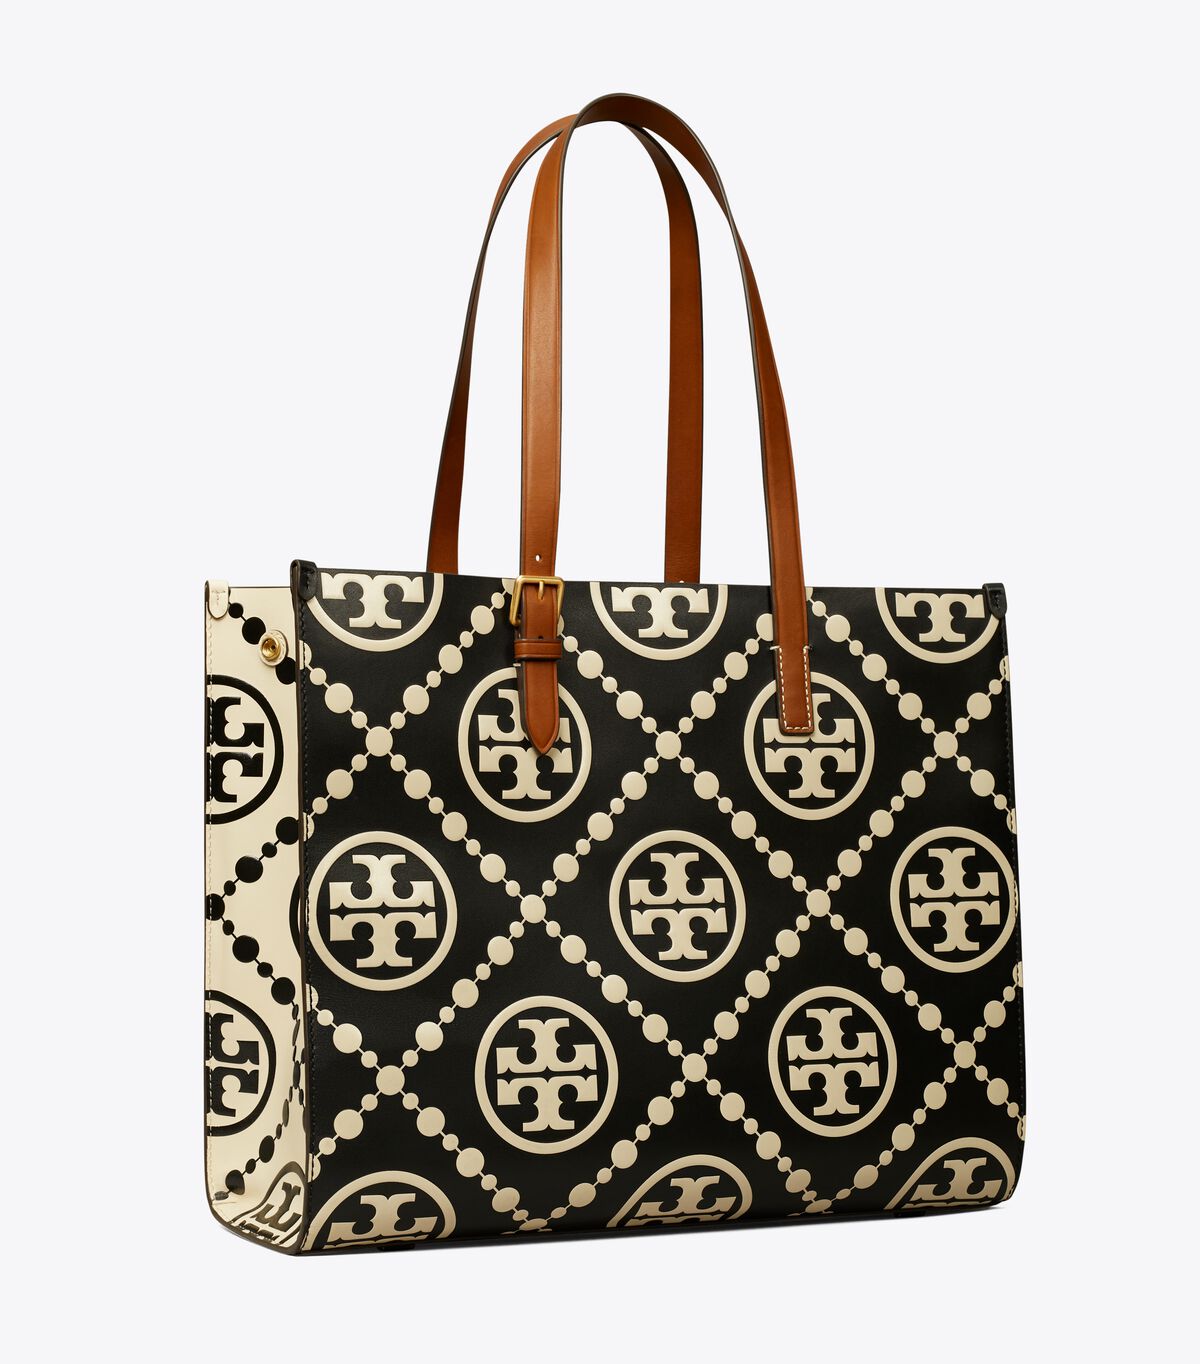 Black Tory Burch T Monogram Women's Tote Bags | OUTLET-67139529